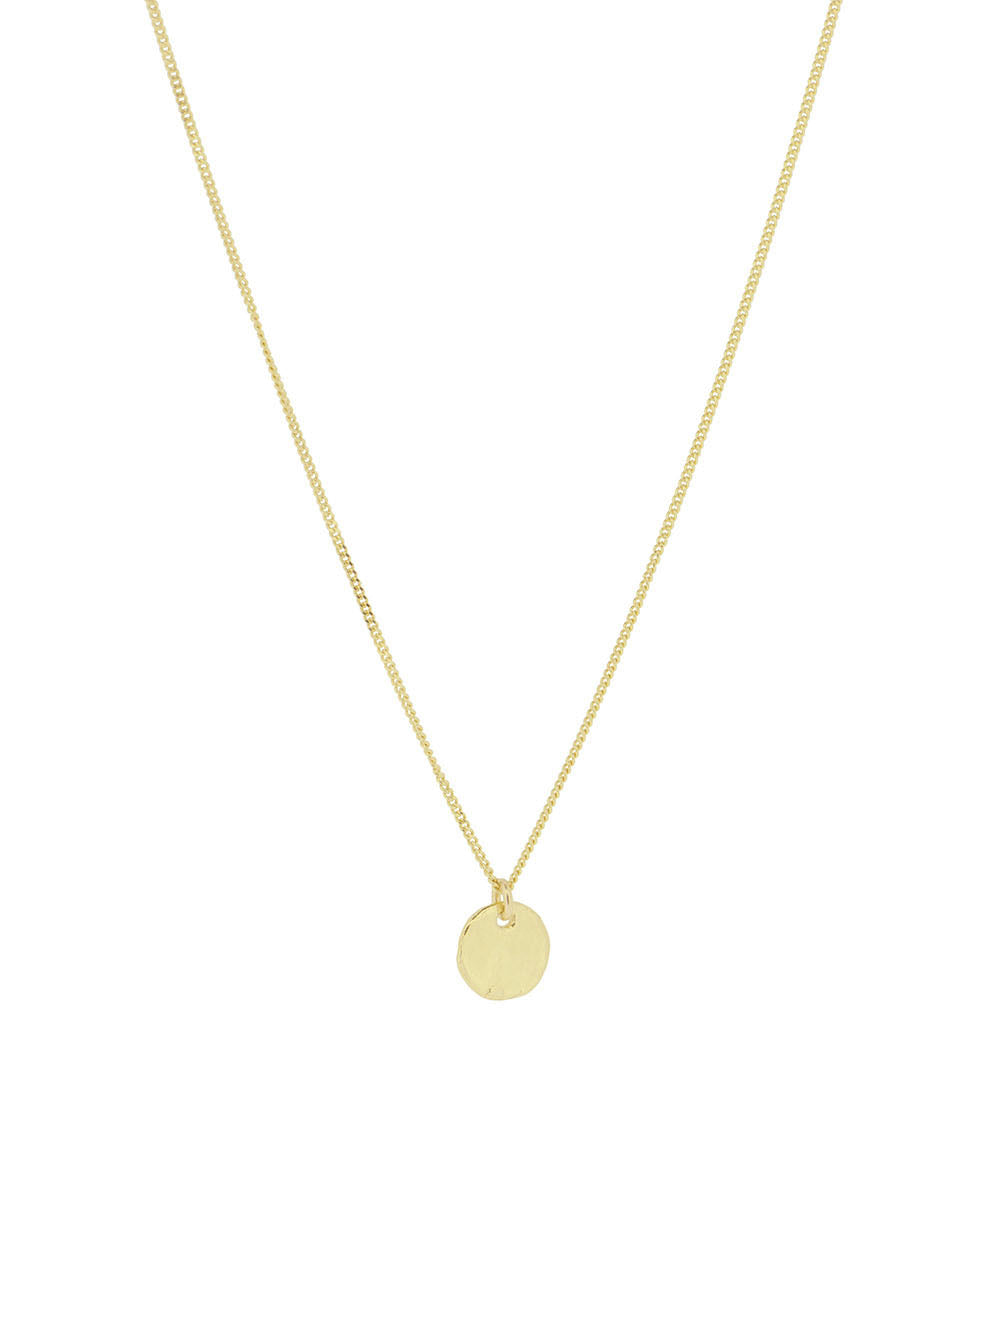 Full moon M | 14K Gold Plated